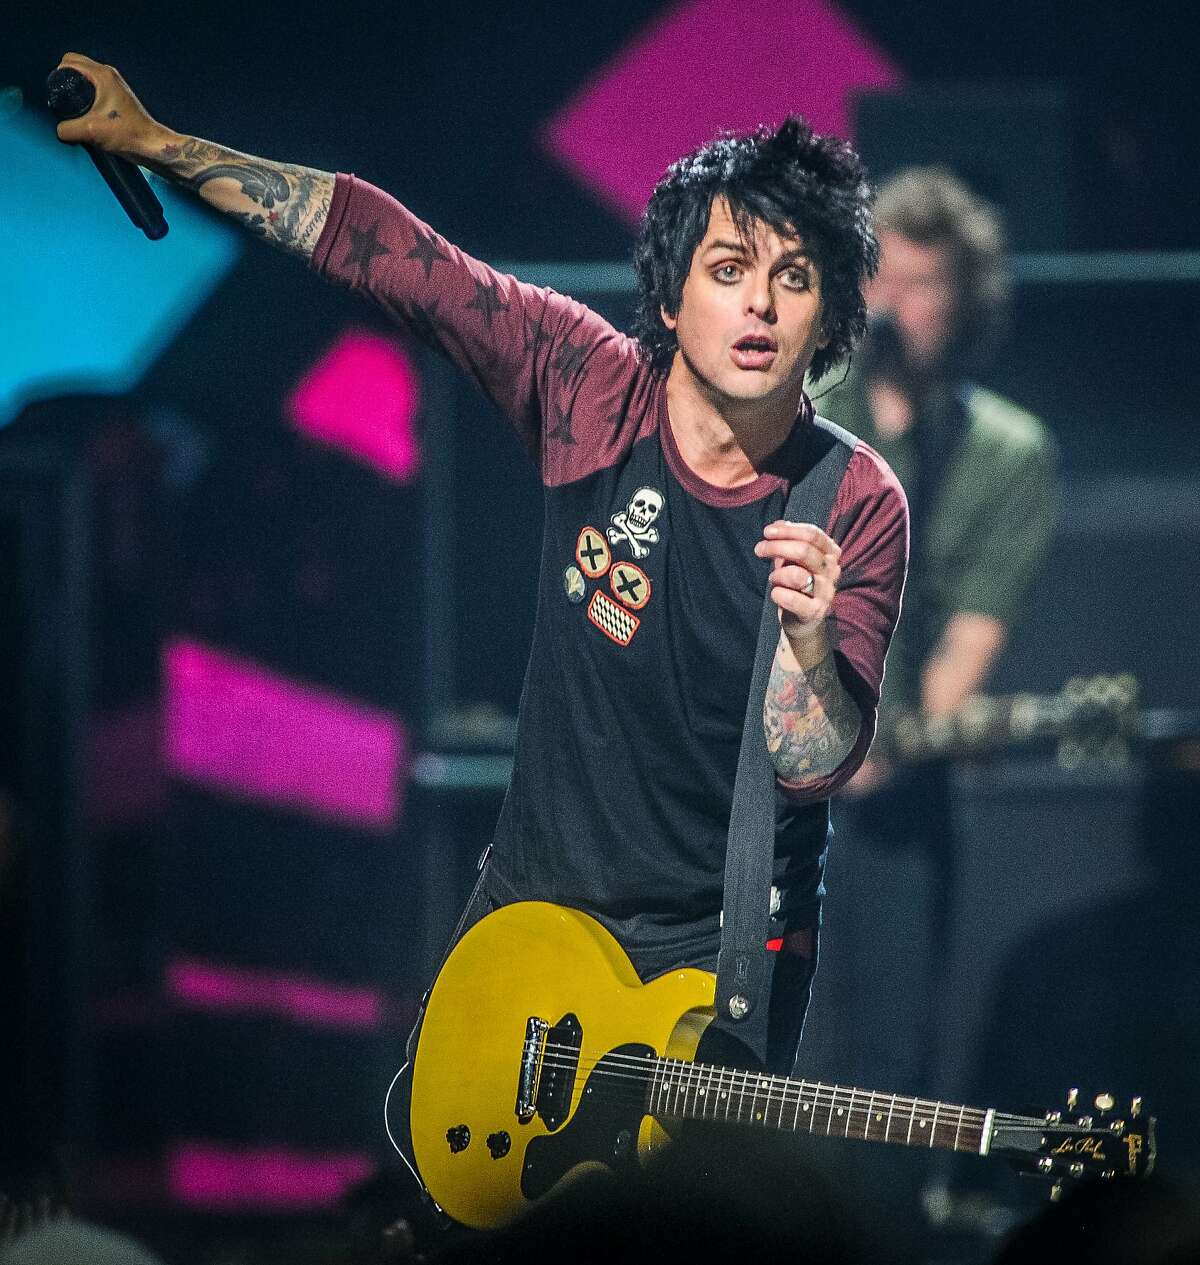 FILE - This Sept. 21, 2012 file photo shows Billie Joe Armstrong of Green Day on stage at the iHeart Radio Music Festival at the MGM Grand Arena in Las Vegas. Sting, Green Day, and Bill Withers are among the first-time nominees for the Rock and Roll Hall of Fame. (Photo by Eric Reed/Invision/AP, file)